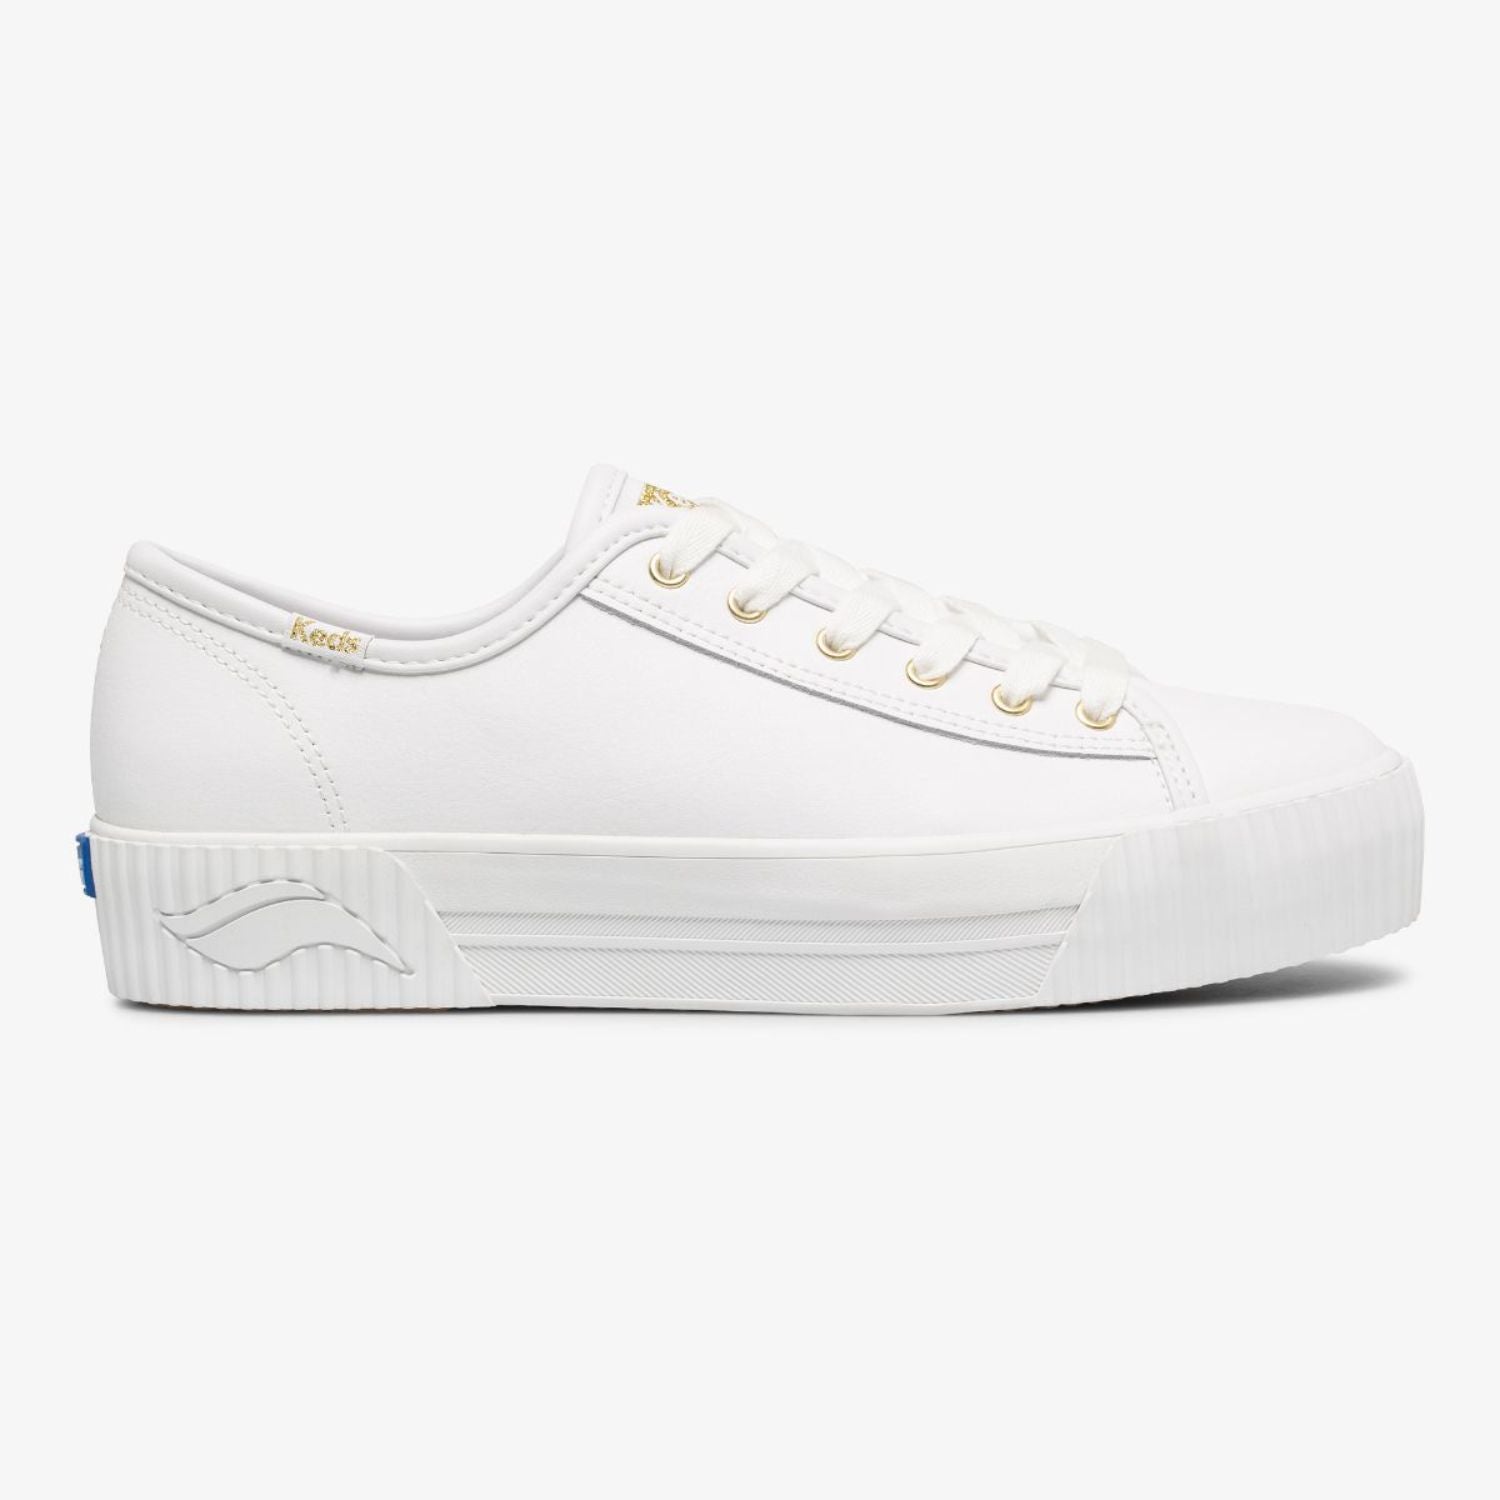 Keds Women's Triple Kick Amp Leather in White Sneakers Keds 7 